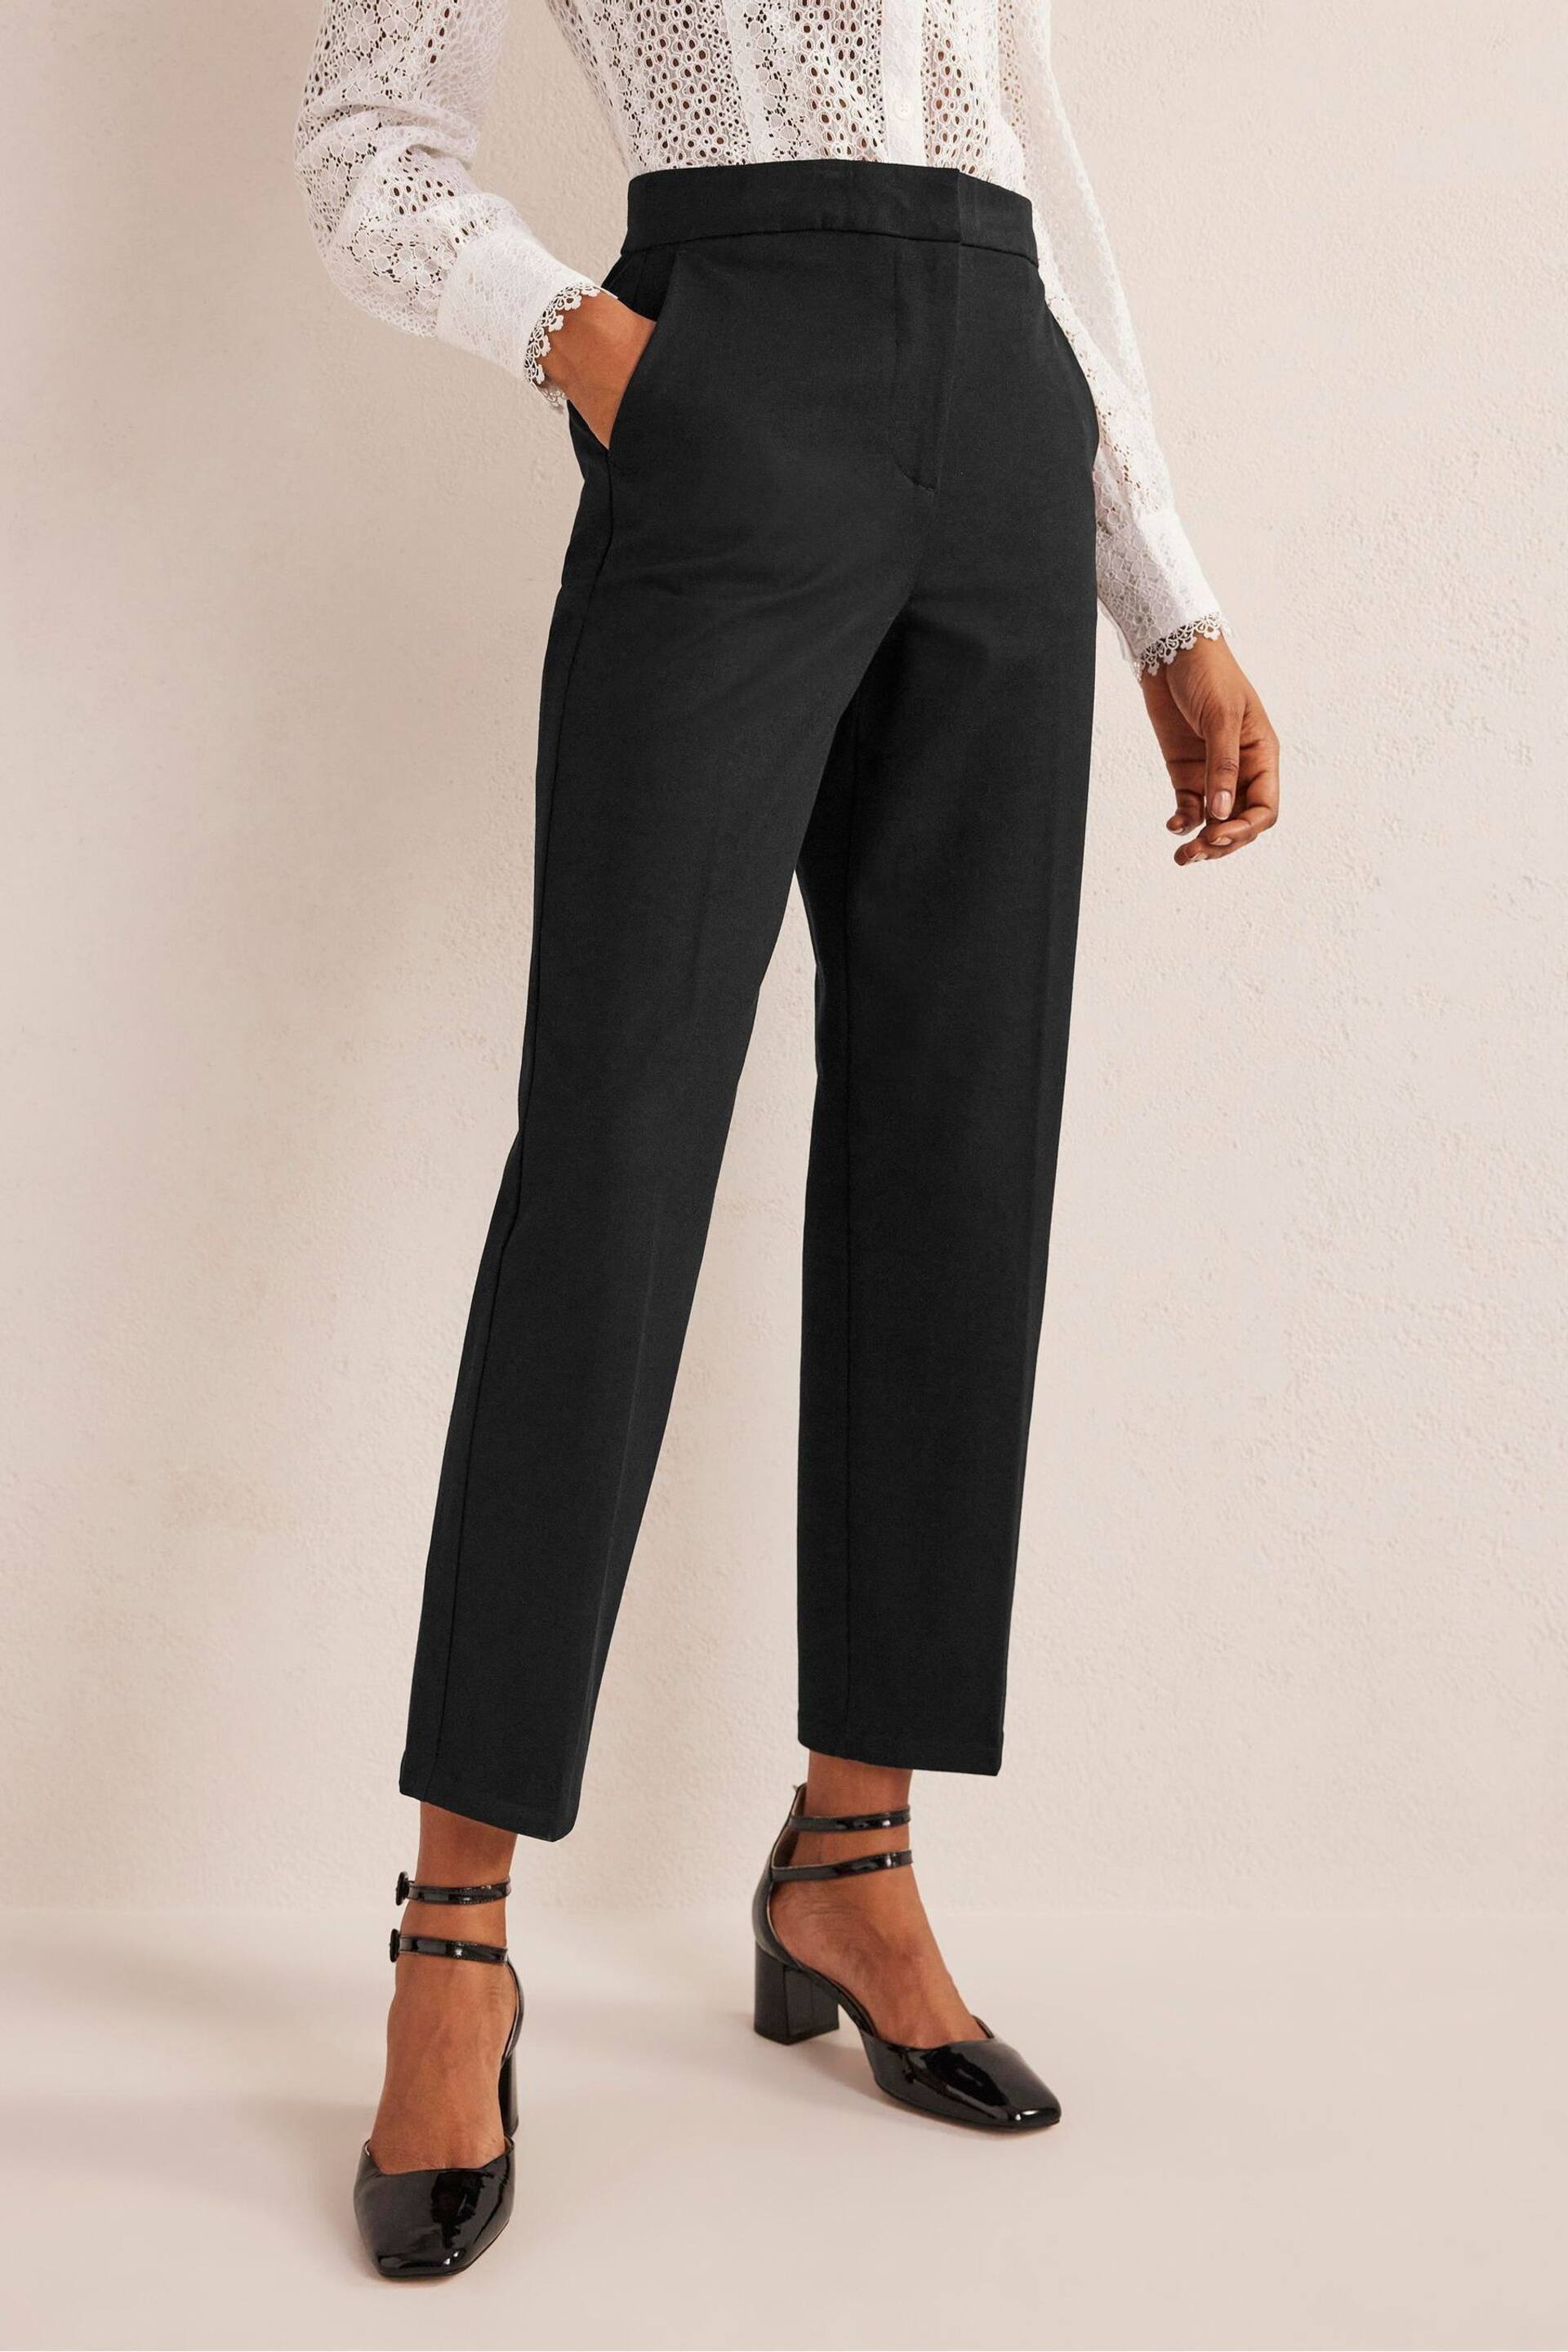 Boden Black Bi-Stretch Tapered Trousers - Image 1 of 6